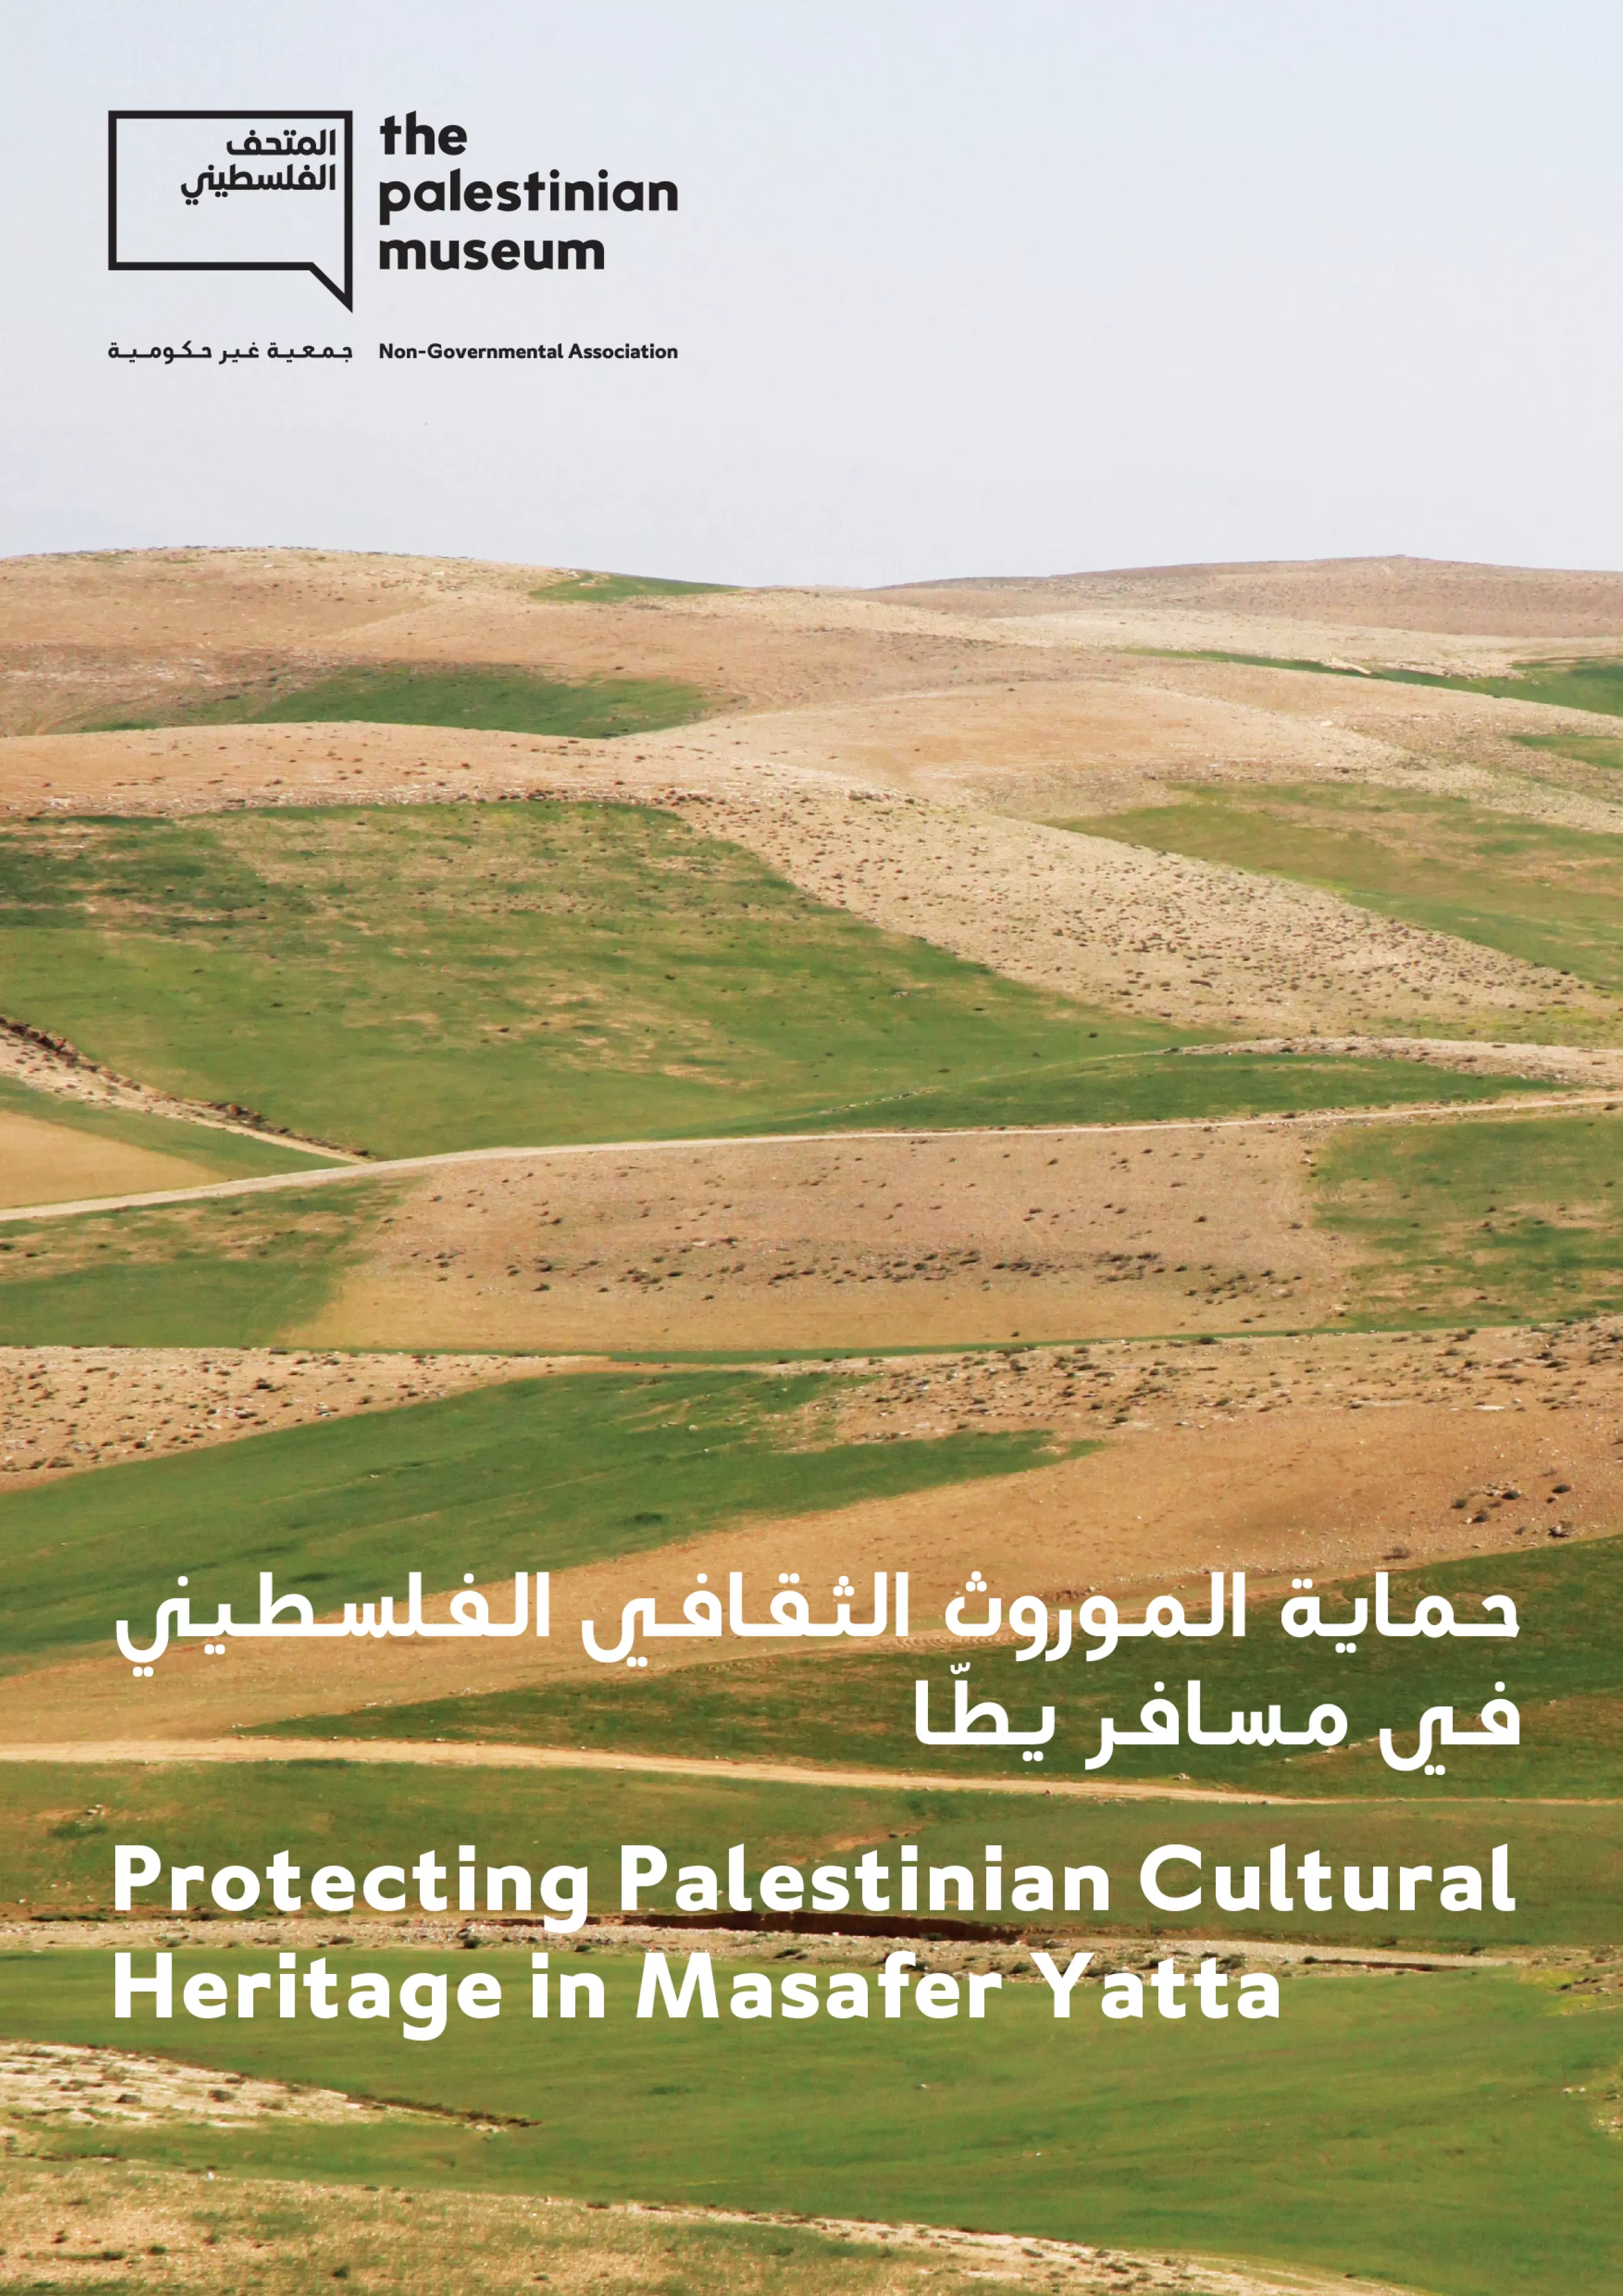 Protecting Palestinian Cultural Heritage in Masafer Yatta